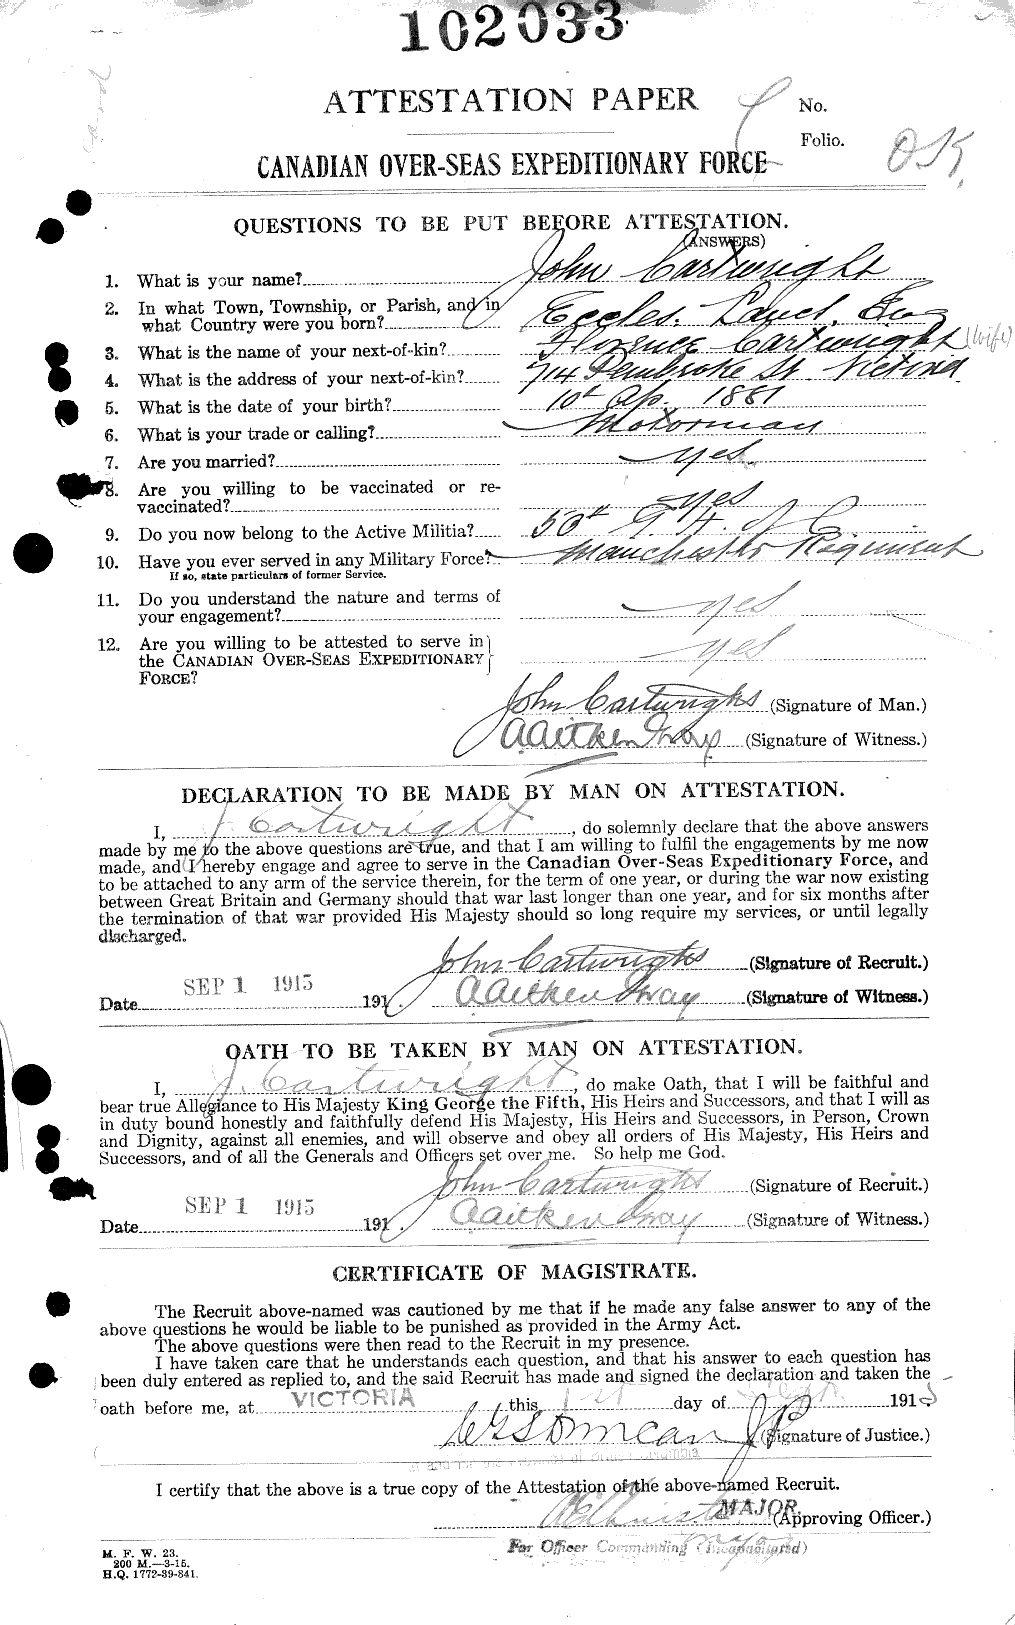 Personnel Records of the First World War - CEF 011599a